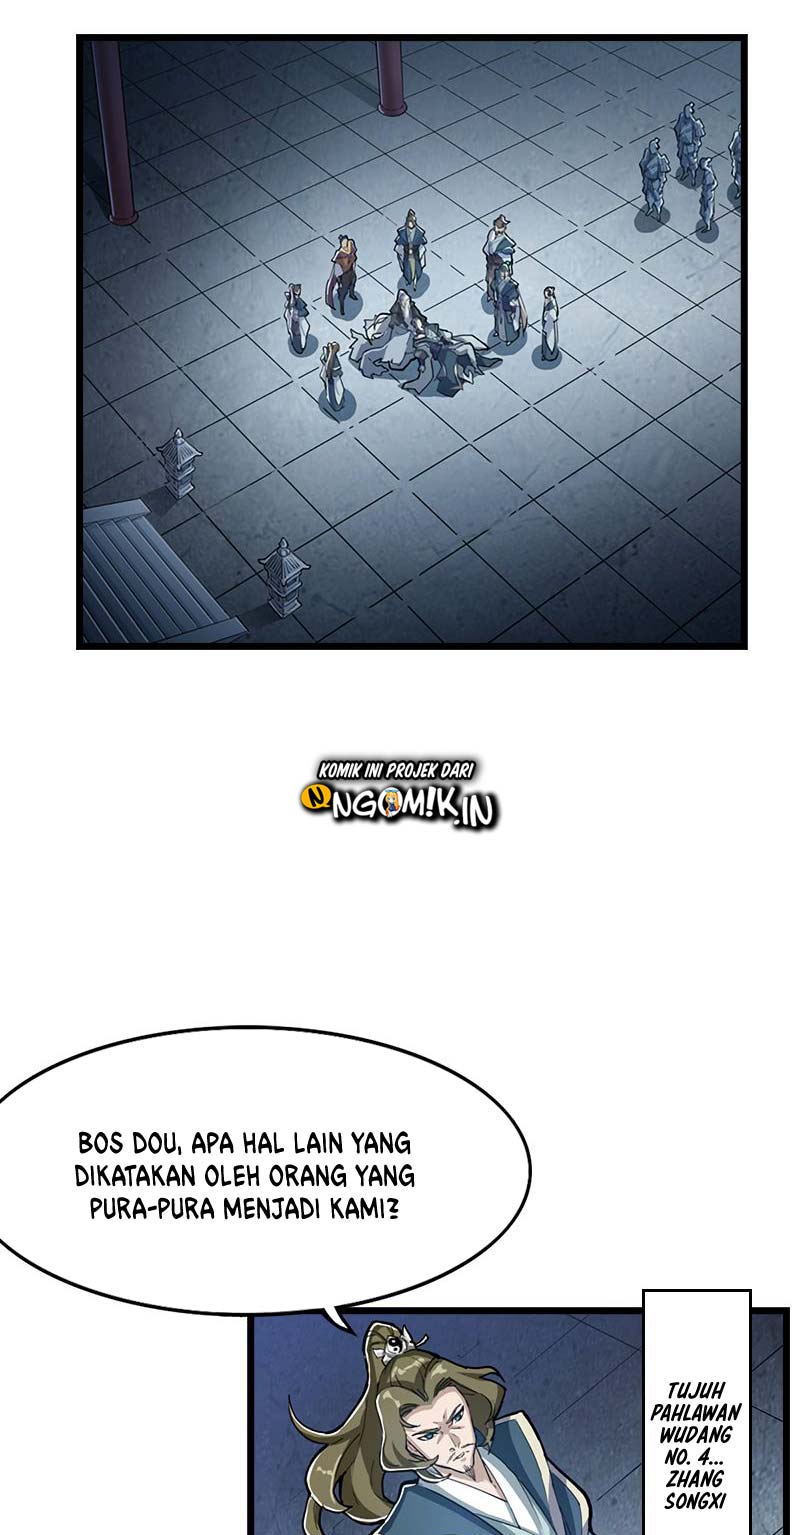 The Heaven Sword and the Dragon Saber Chapter 04